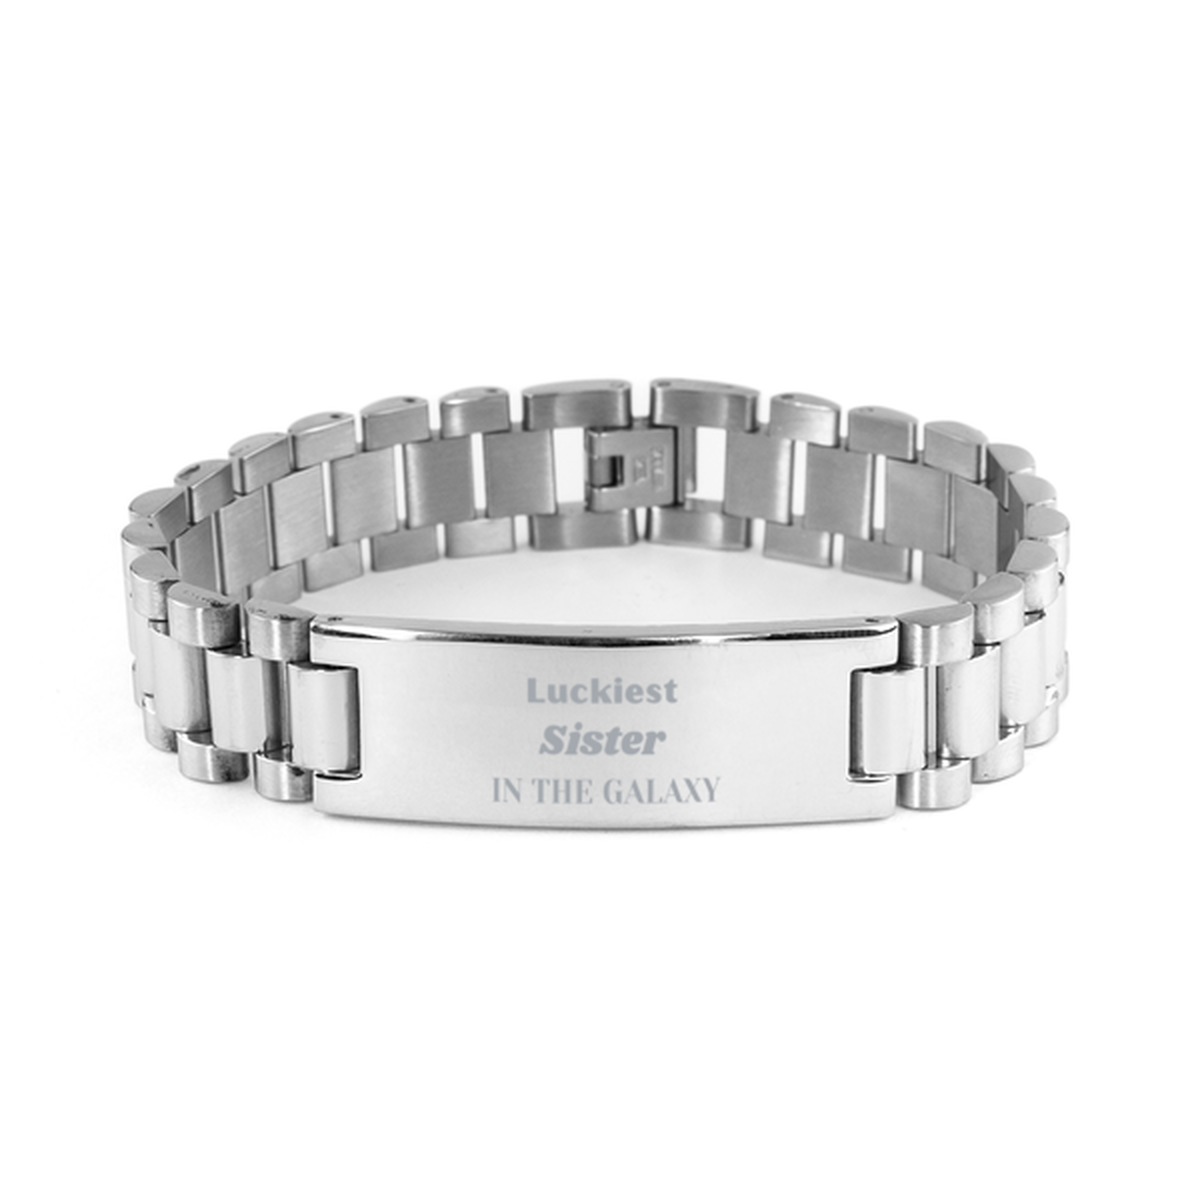 Luckiest Sister in the Galaxy, To My Sister Engraved Gifts, Christmas Sister Ladder Stainless Steel Bracelet Gifts, X-mas Birthday Unique Gifts For Sister Men Women